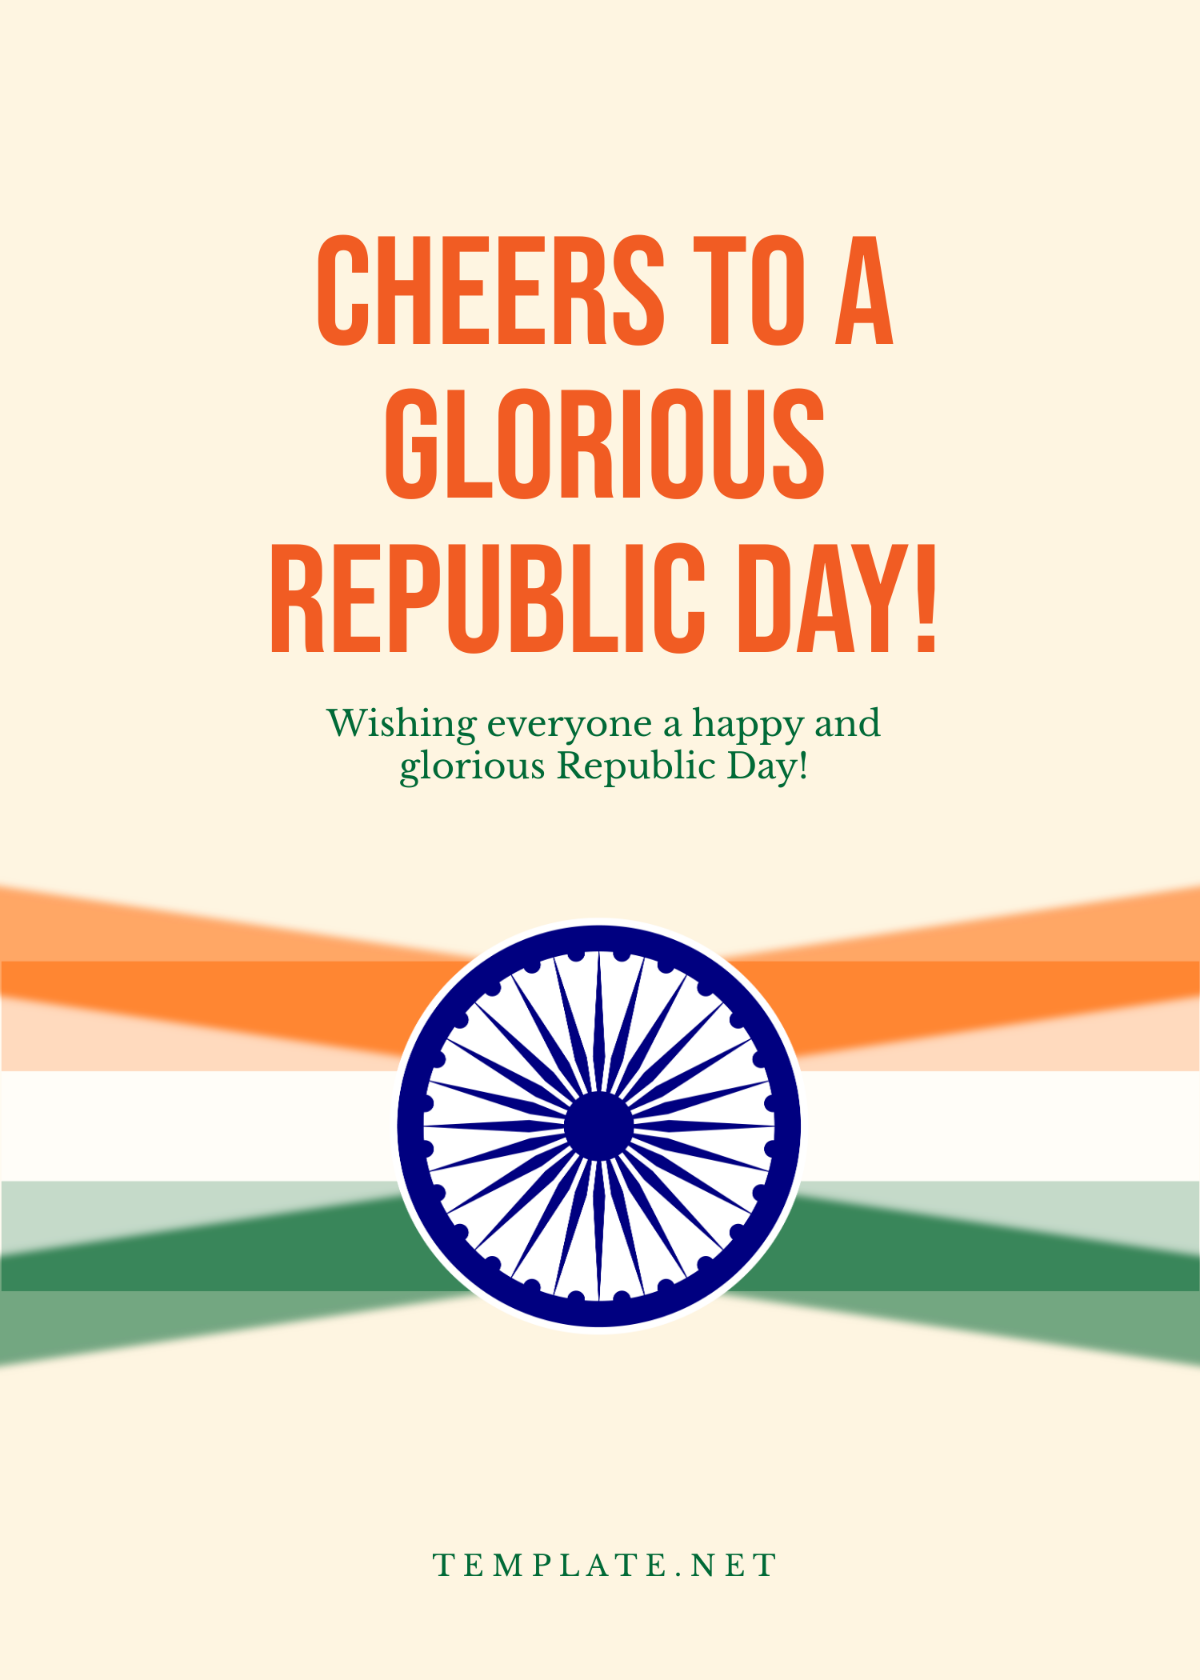 Republic Day Greeting Card Wishes